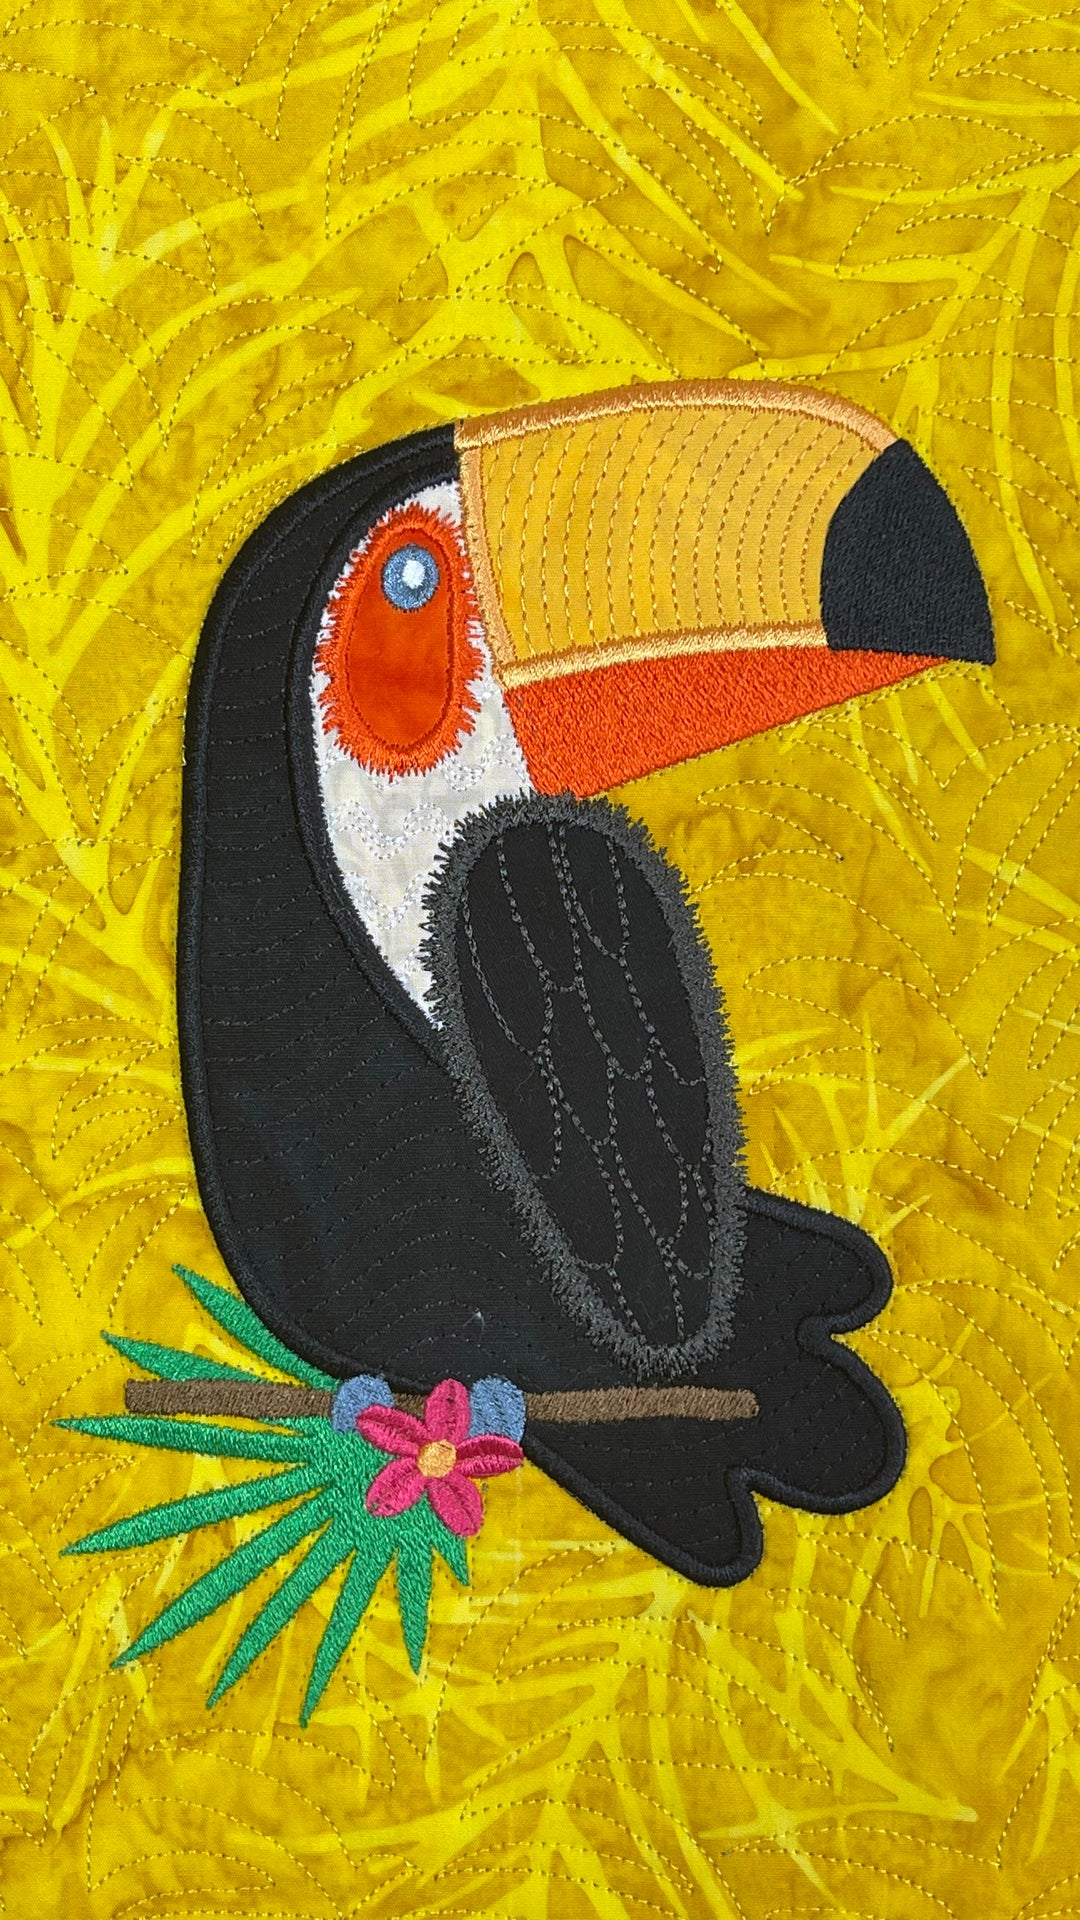 Tropicale for Machine Embroidery